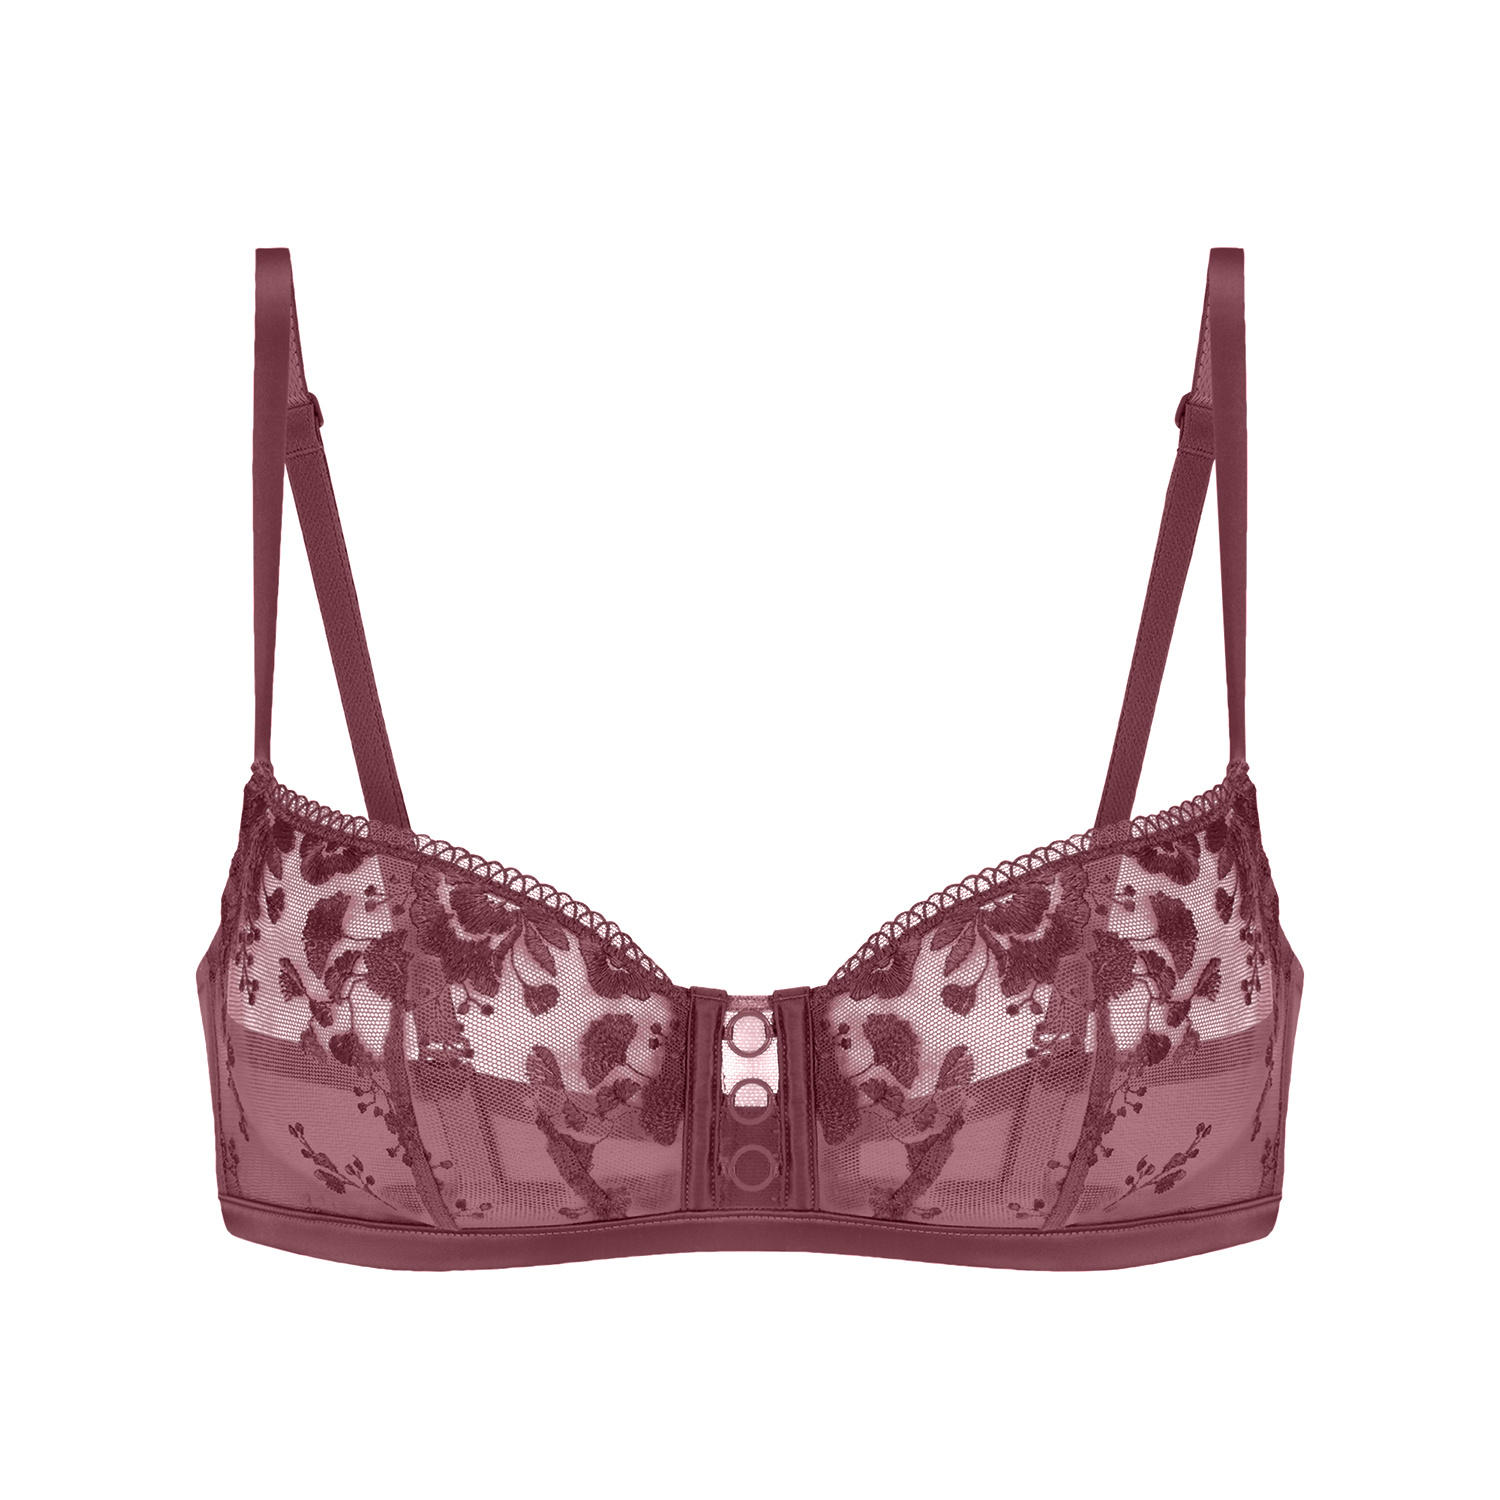 Orphee Demi Bra Diva Pink (327) 15S330 - Lace & Day